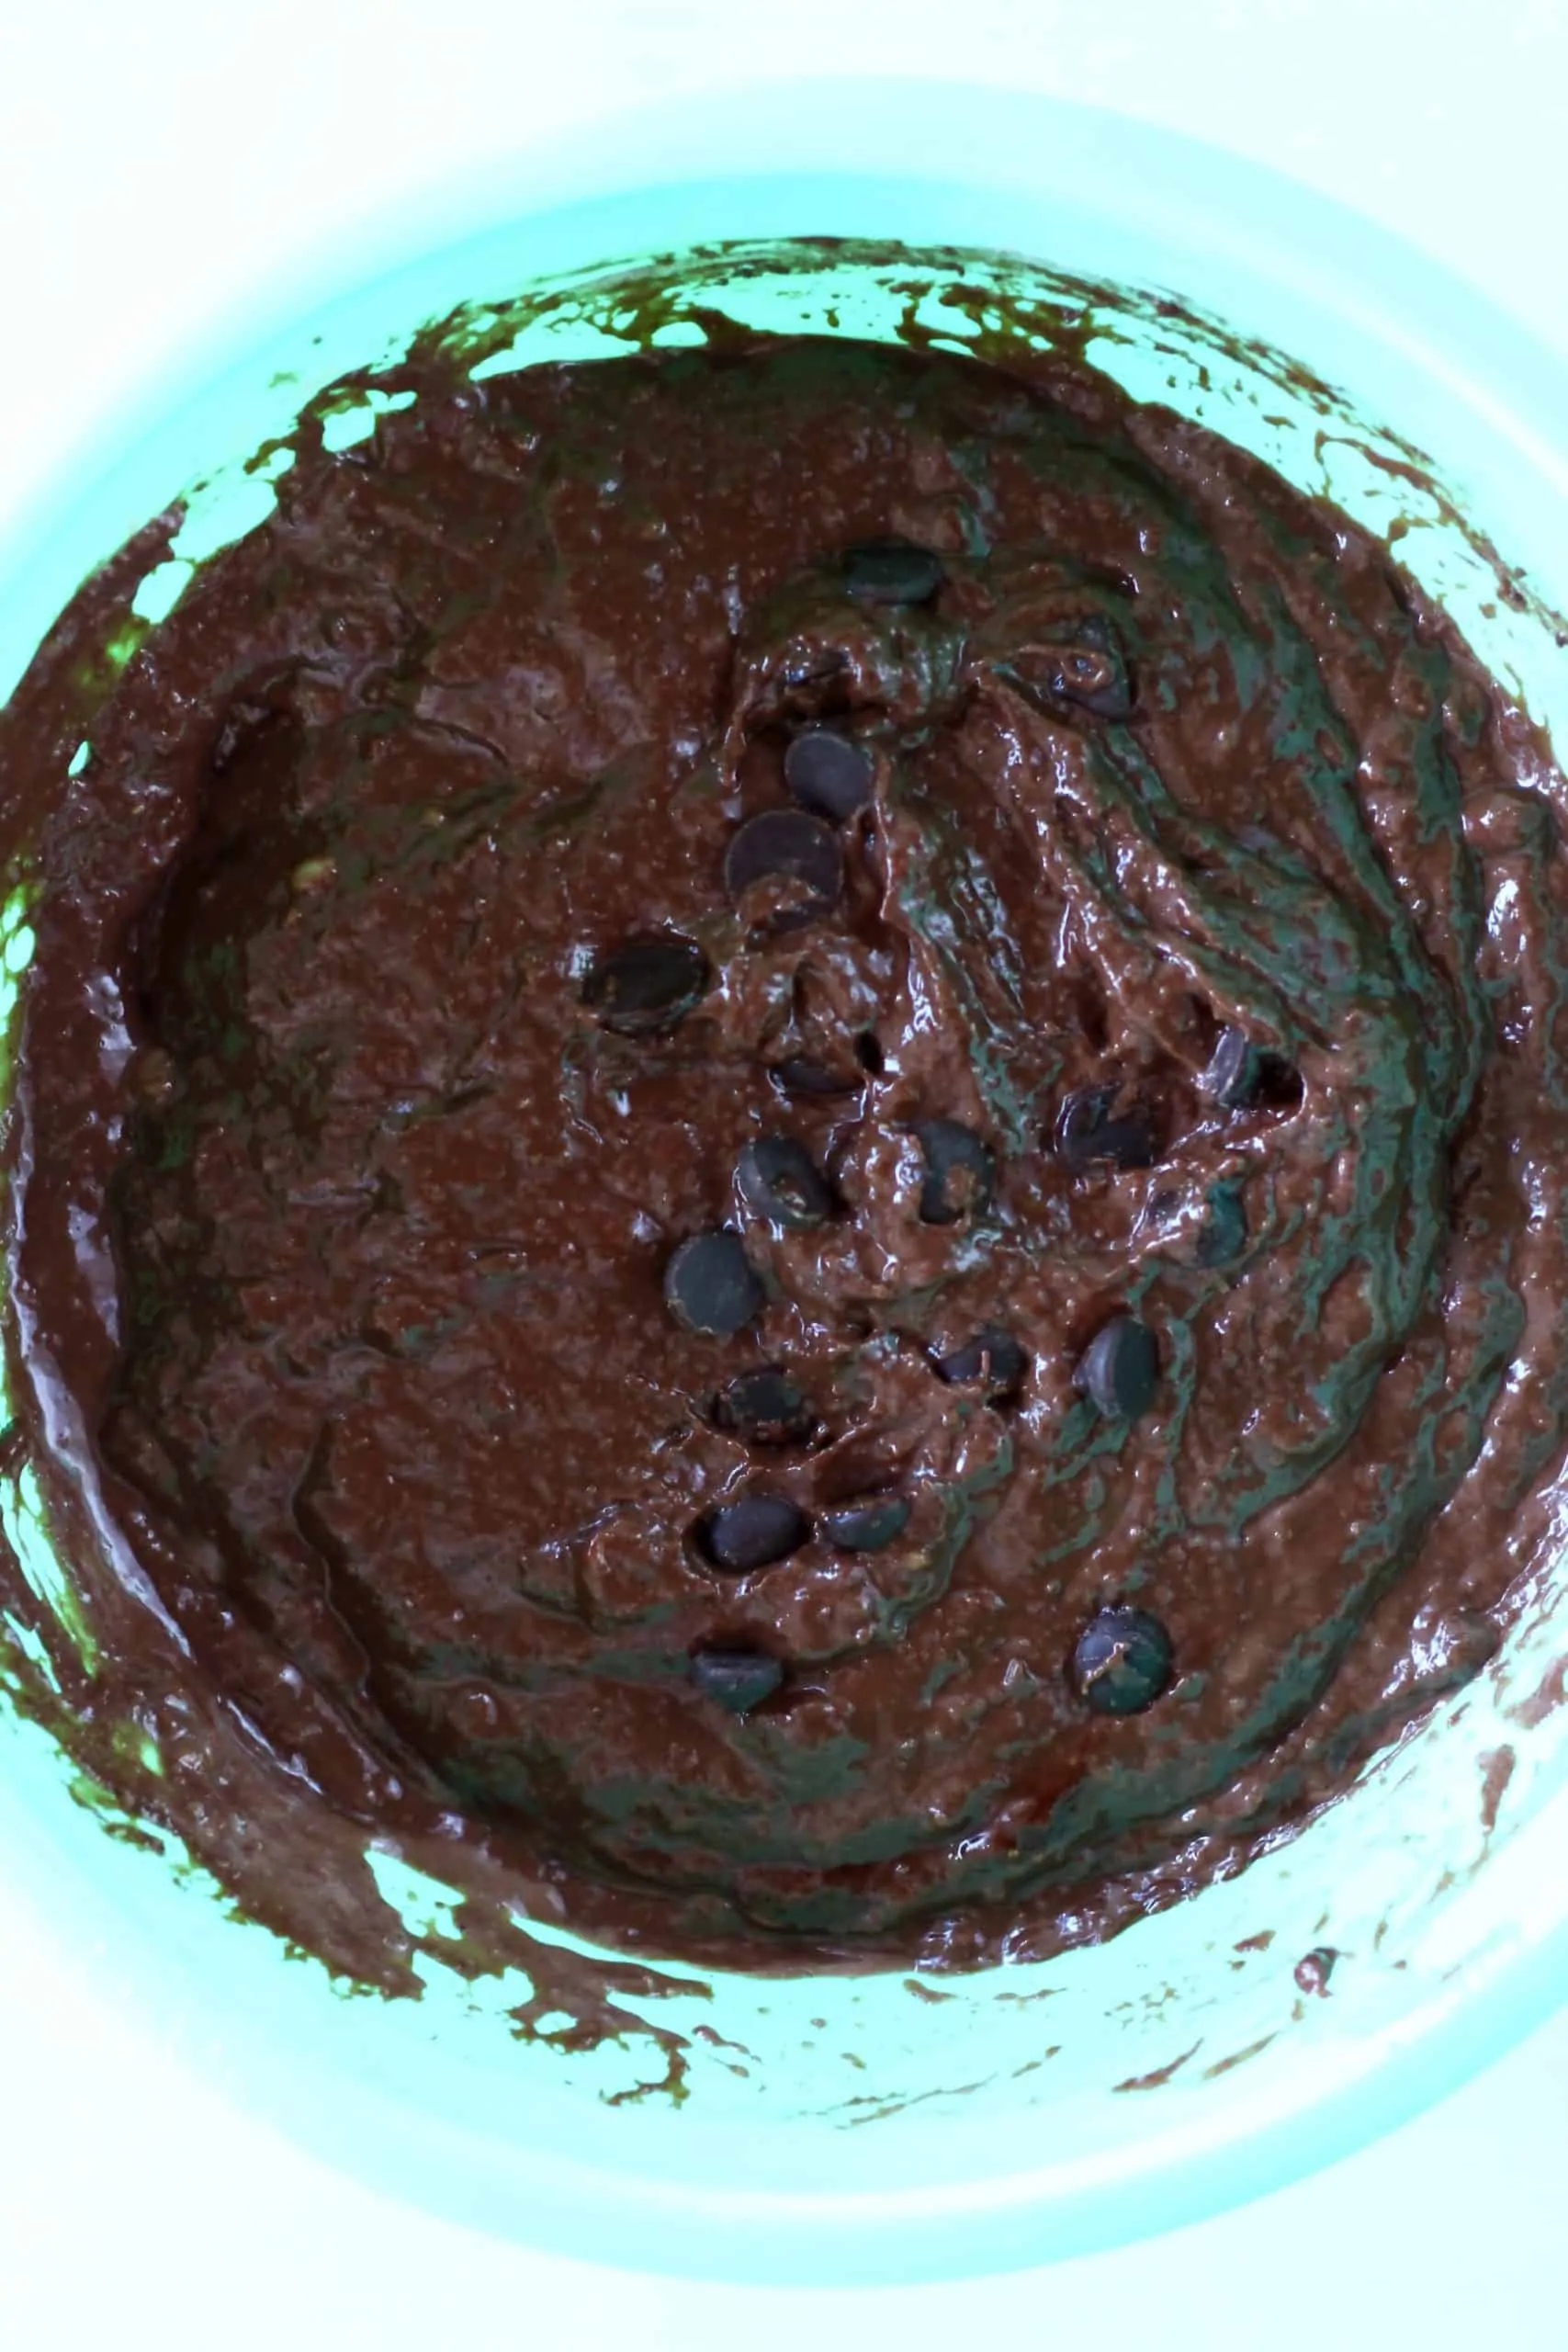 Raw gluten-free vegan chocolate banana bread batter with chocolate chips in a mixing bowl